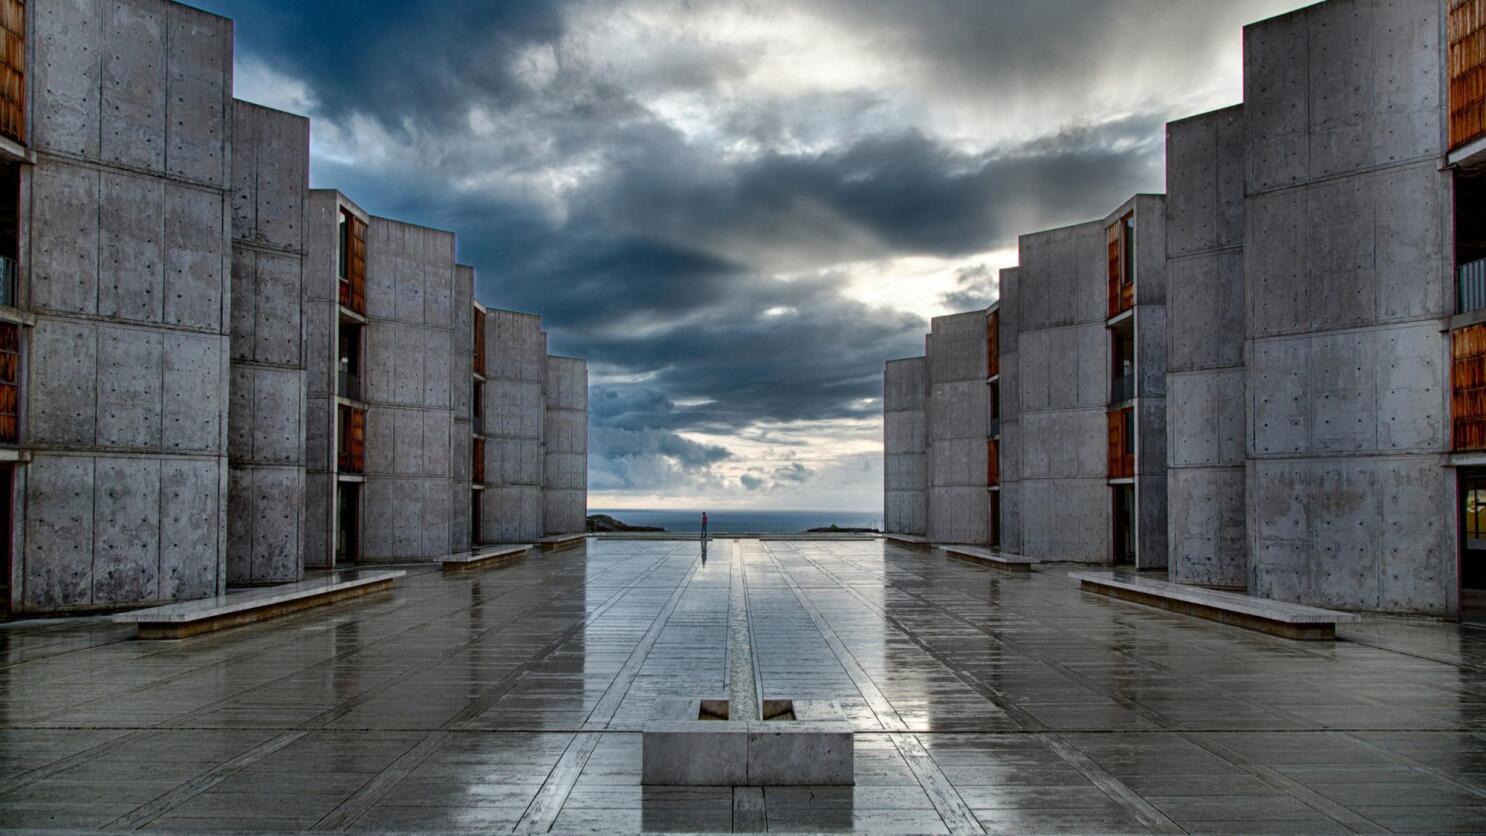 La Jolla's Salk Institute: Science Meets Architecture and Oh, What a View!